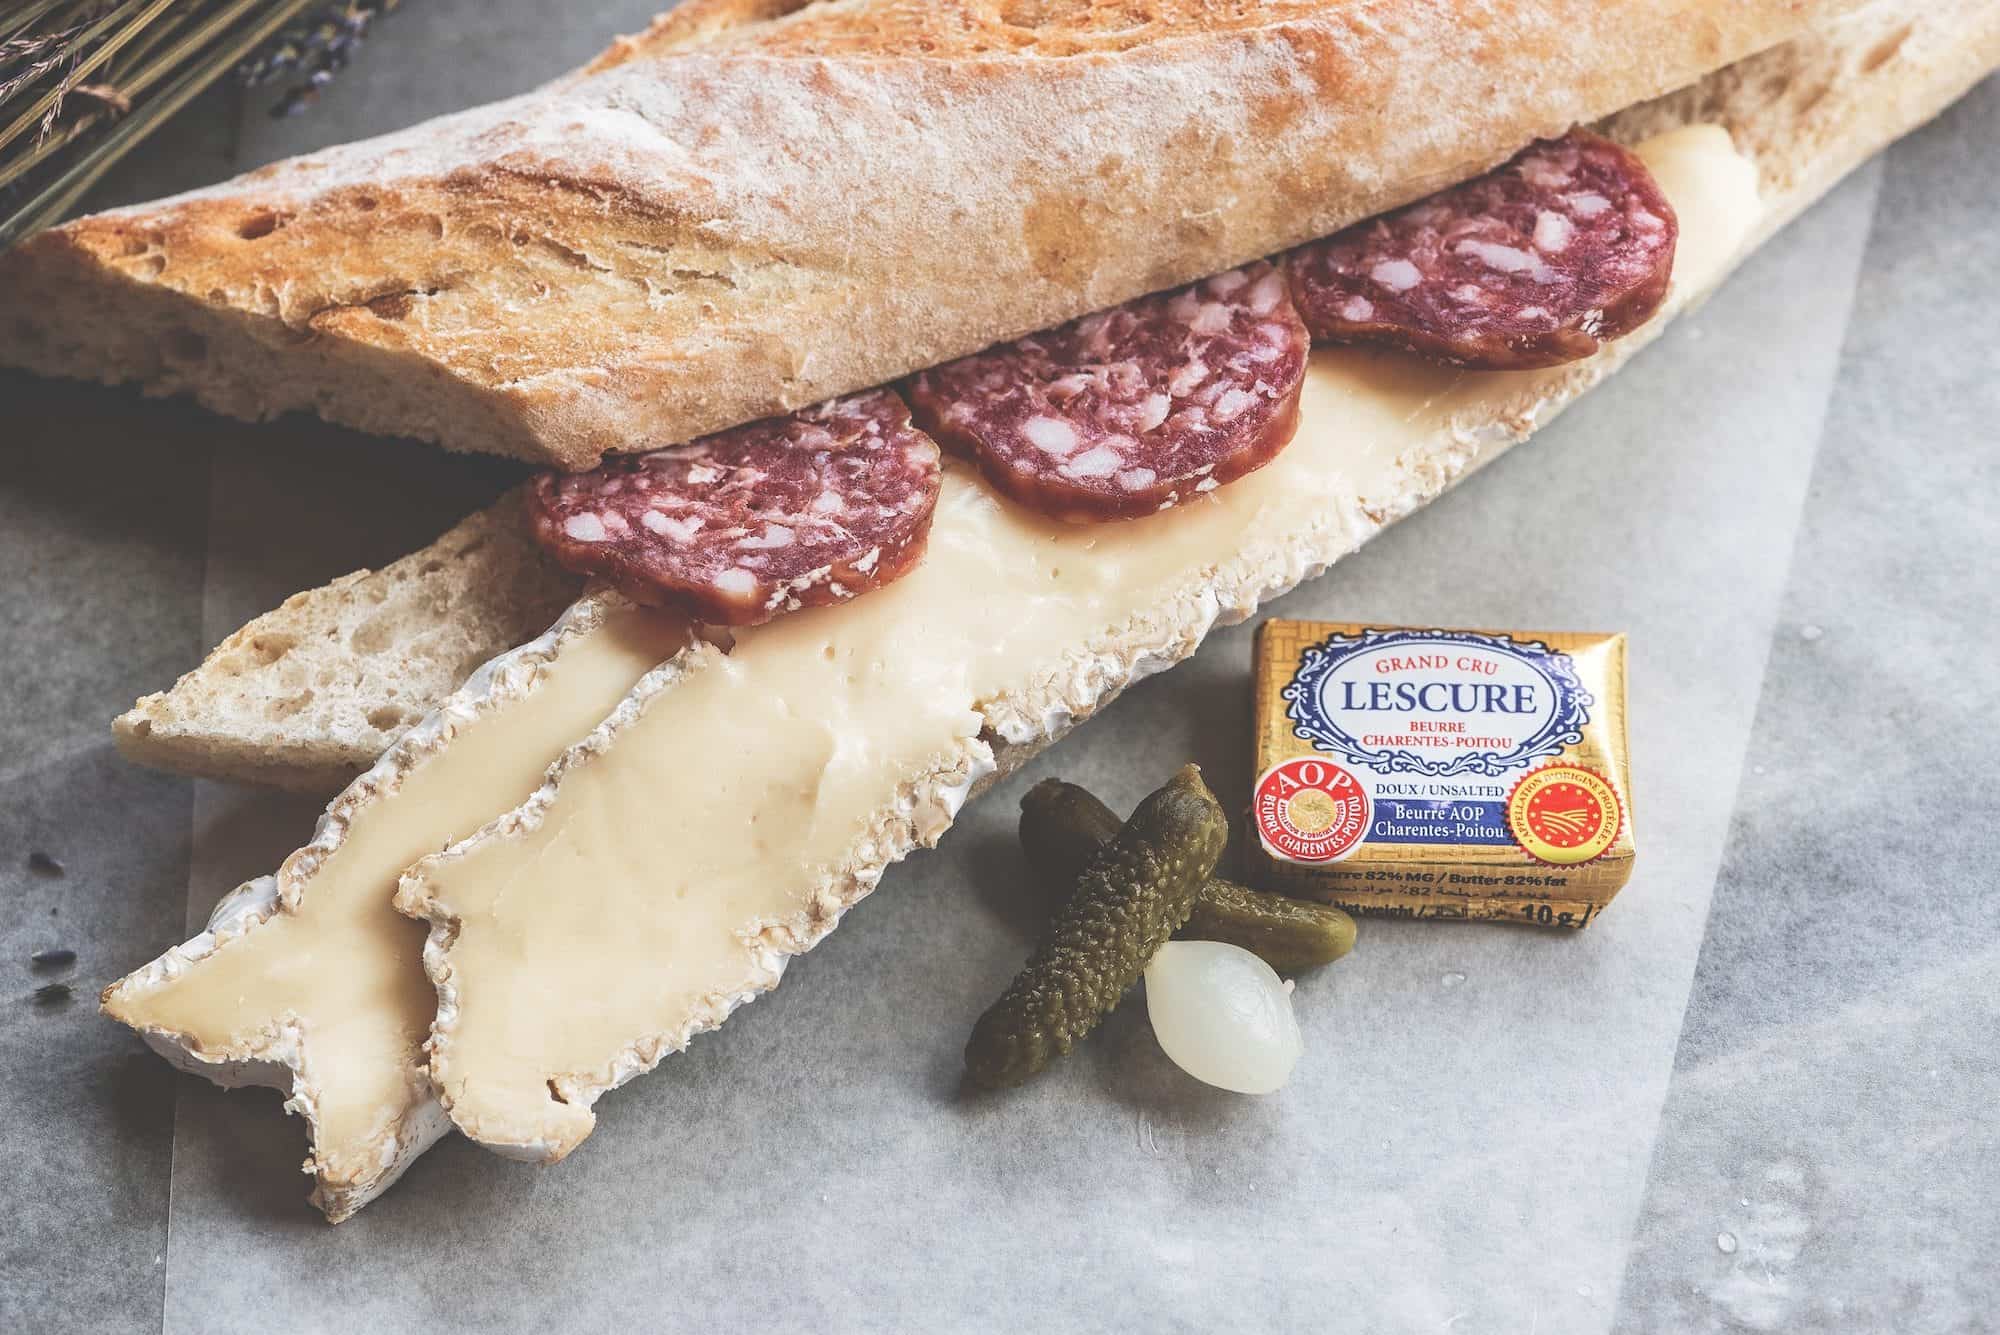 A delicious French saucisson and camembert baguette sandwich is perfect for a Paris summer picnic.